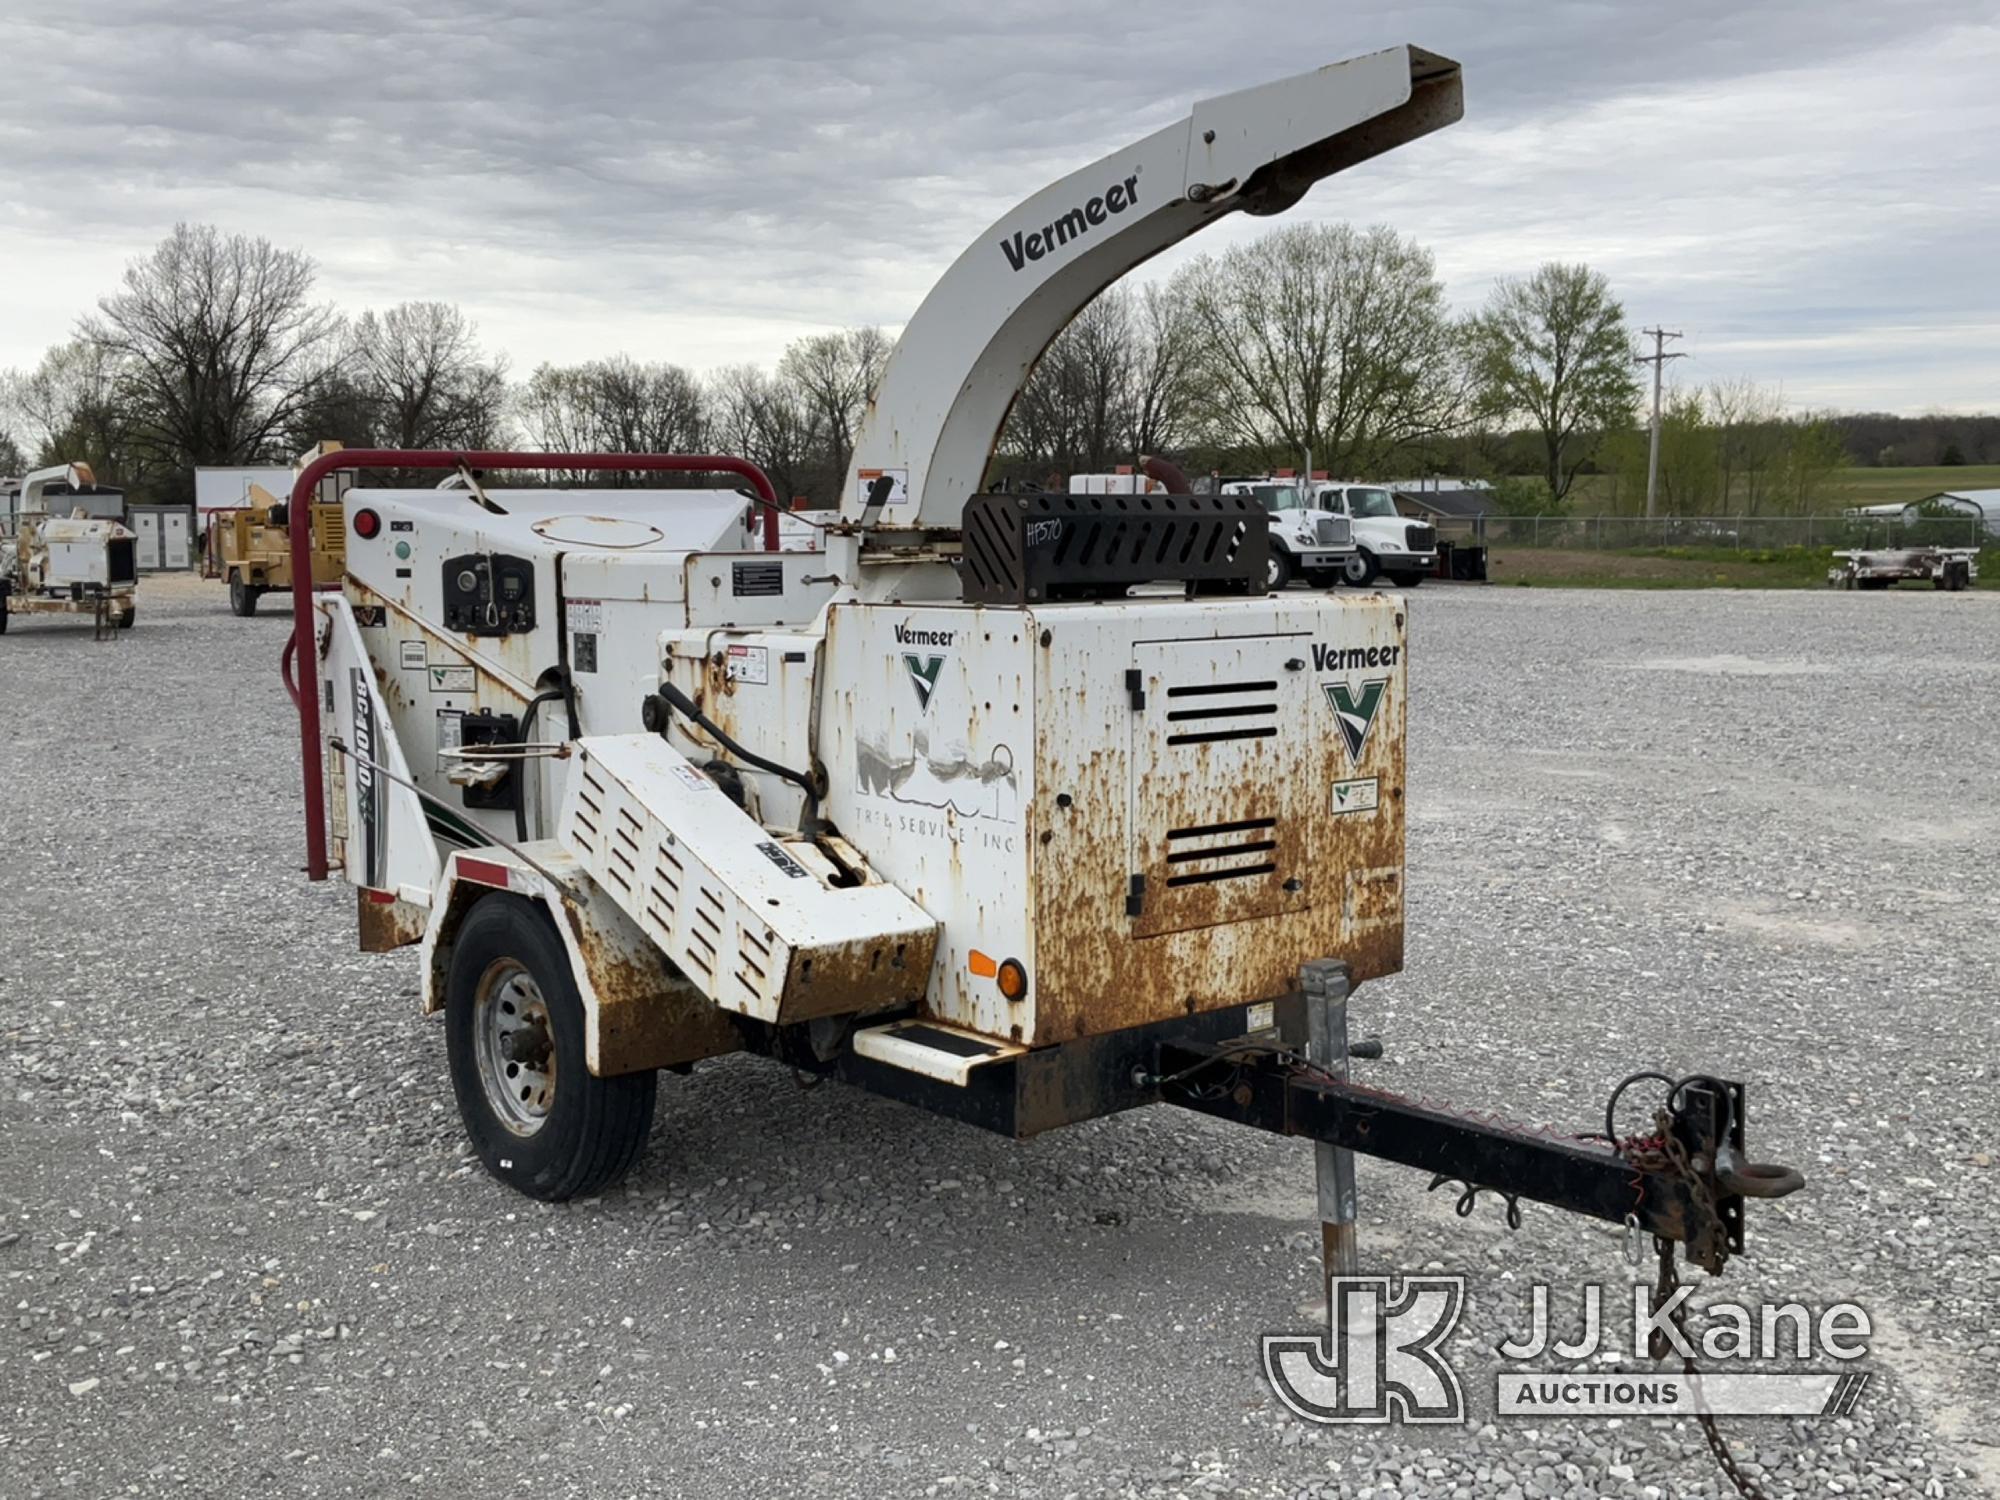 (Hawk Point, MO) 2016 Vermeer BC1000XL Chipper (12in Drum) No Title) (Runs & Operates) (Rust & Paint